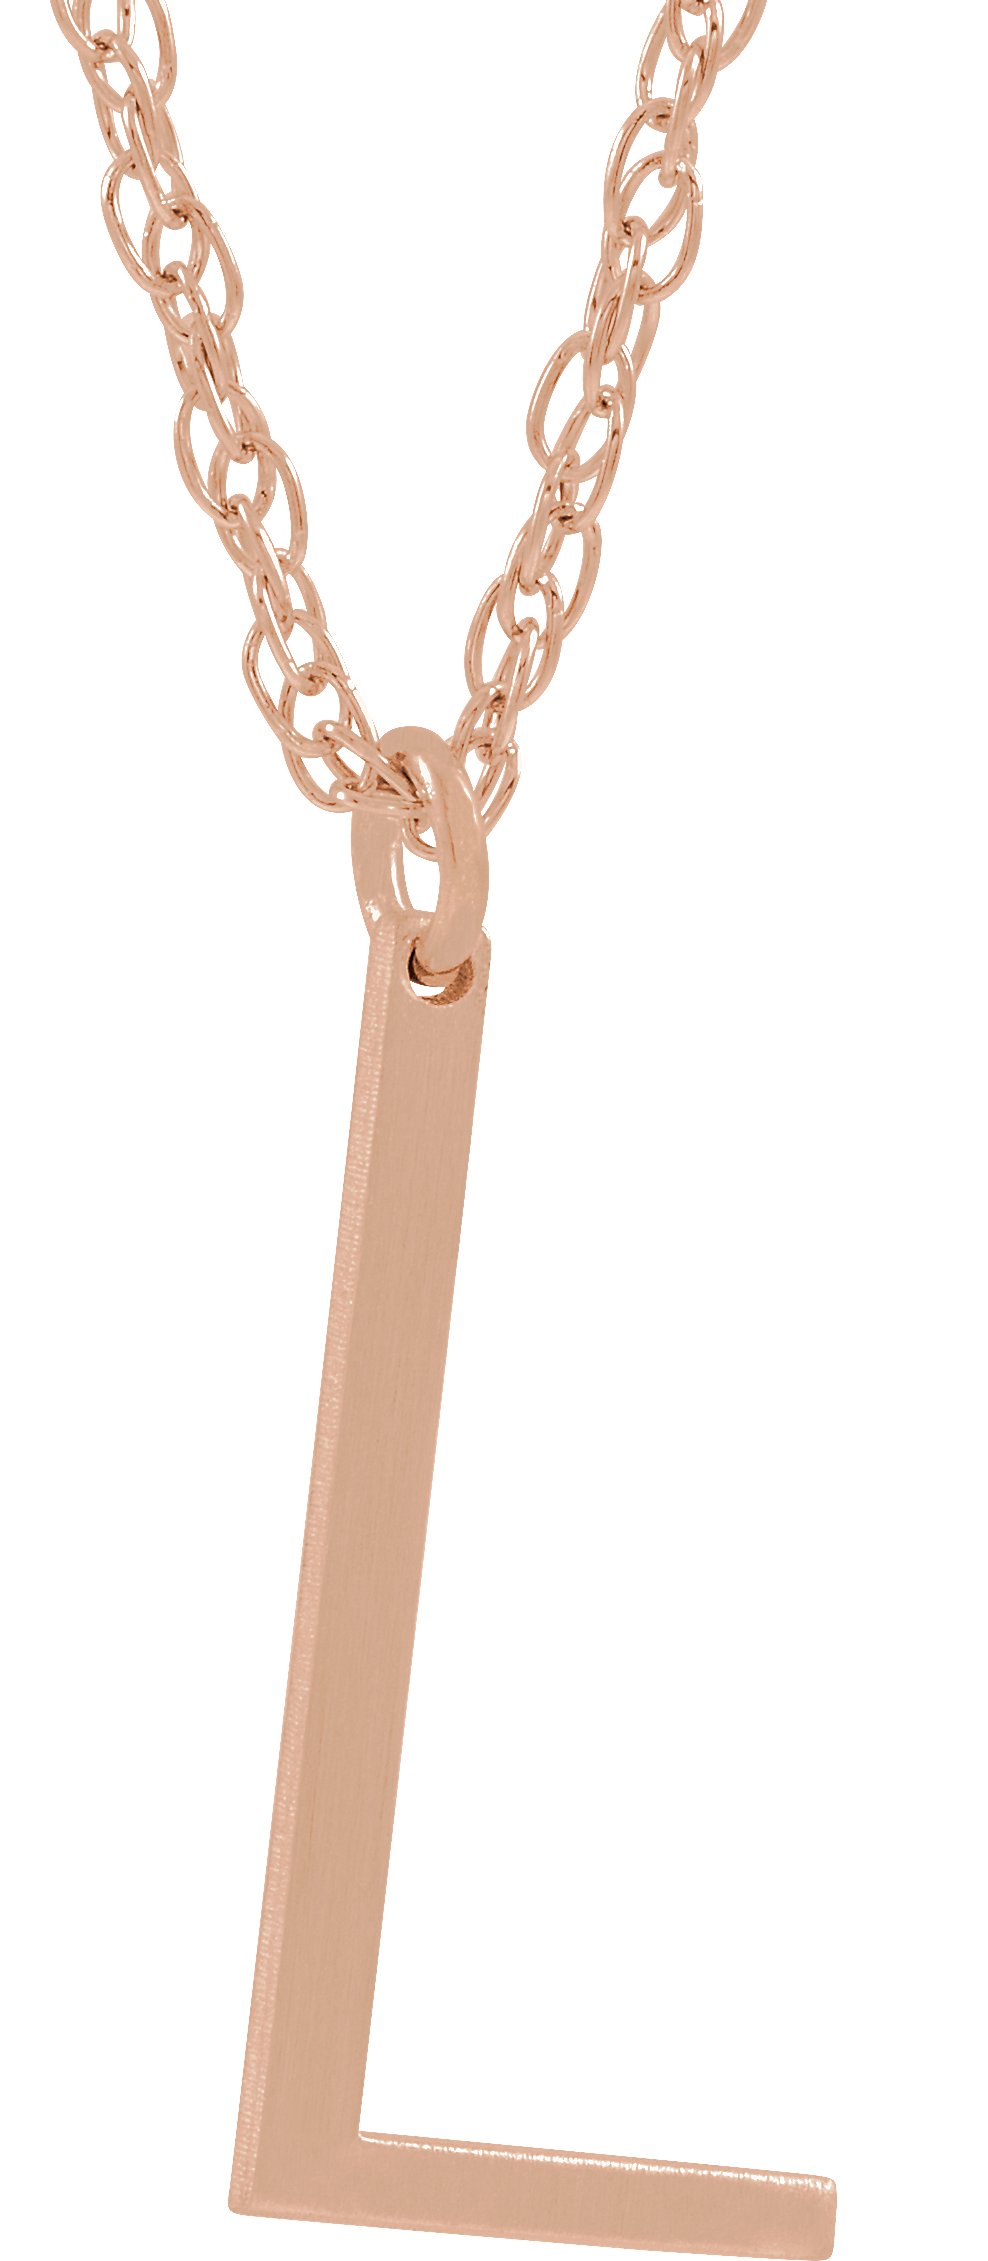 14K Rose Gold-Plated Sterling Silver Block Initial L 16-18" Necklace with Brush Finish